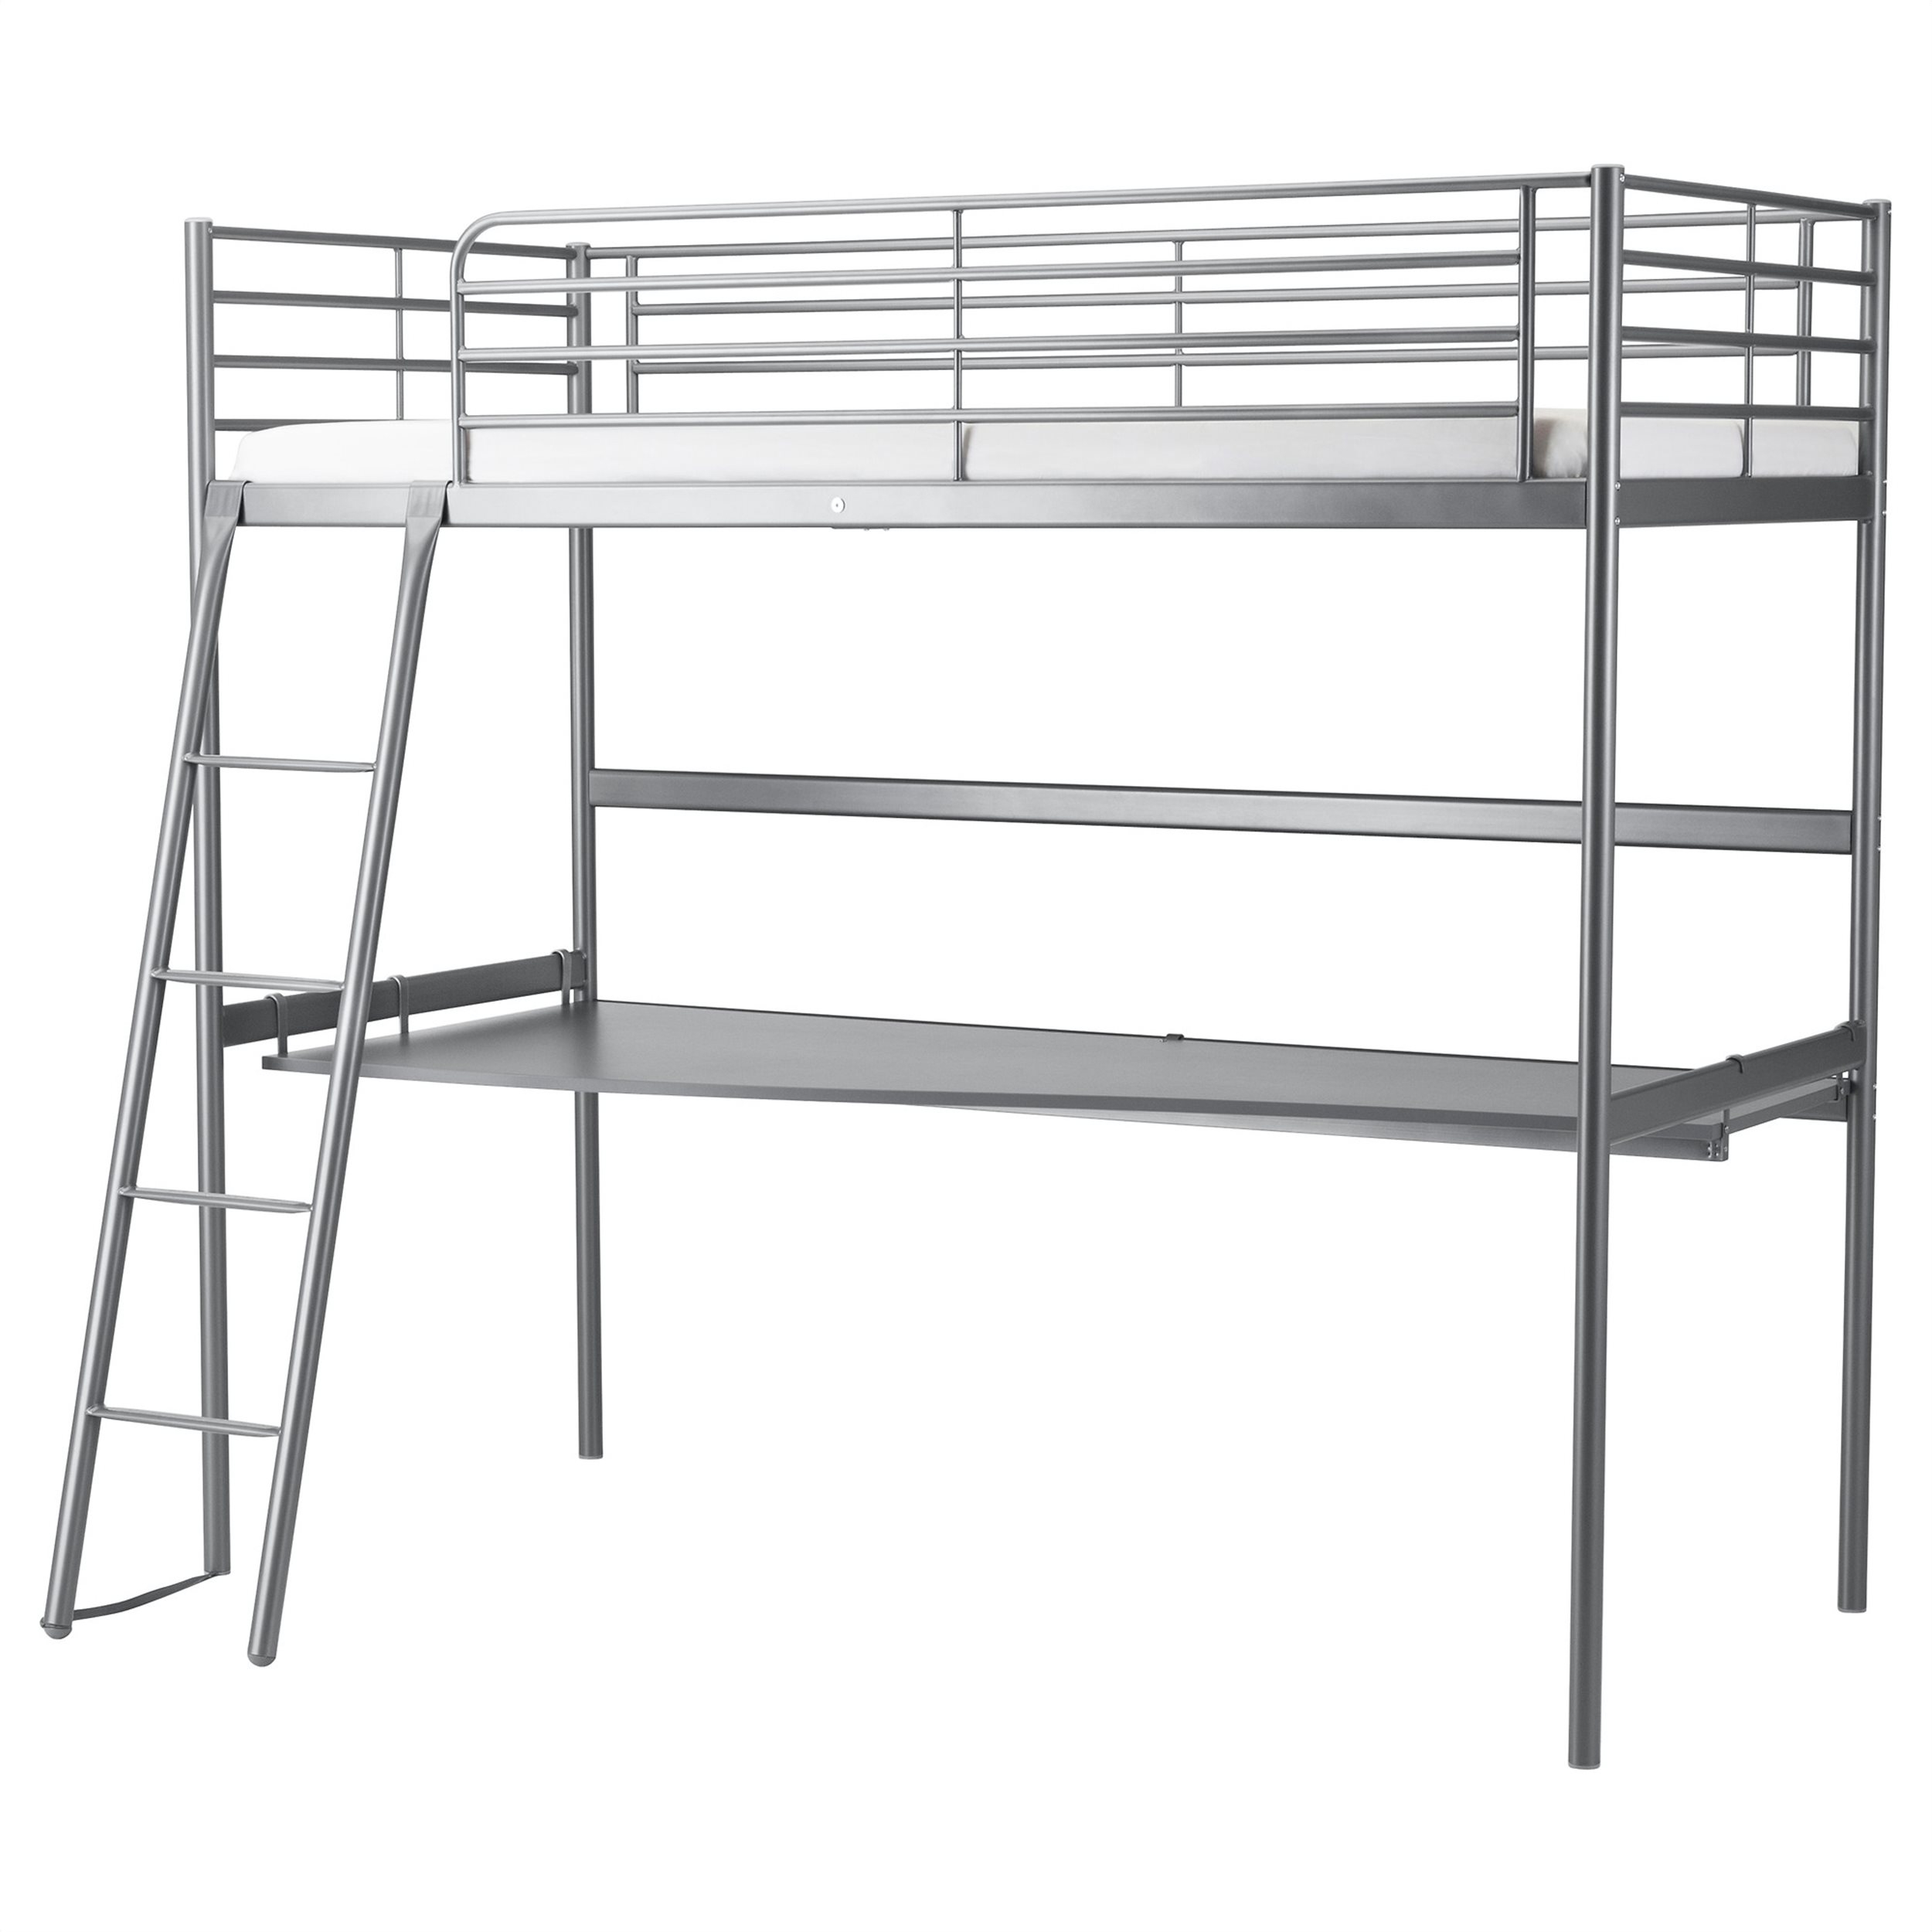 Ikea Loft Beds To Or Not In, Ikea Loft Bed Weight Limit